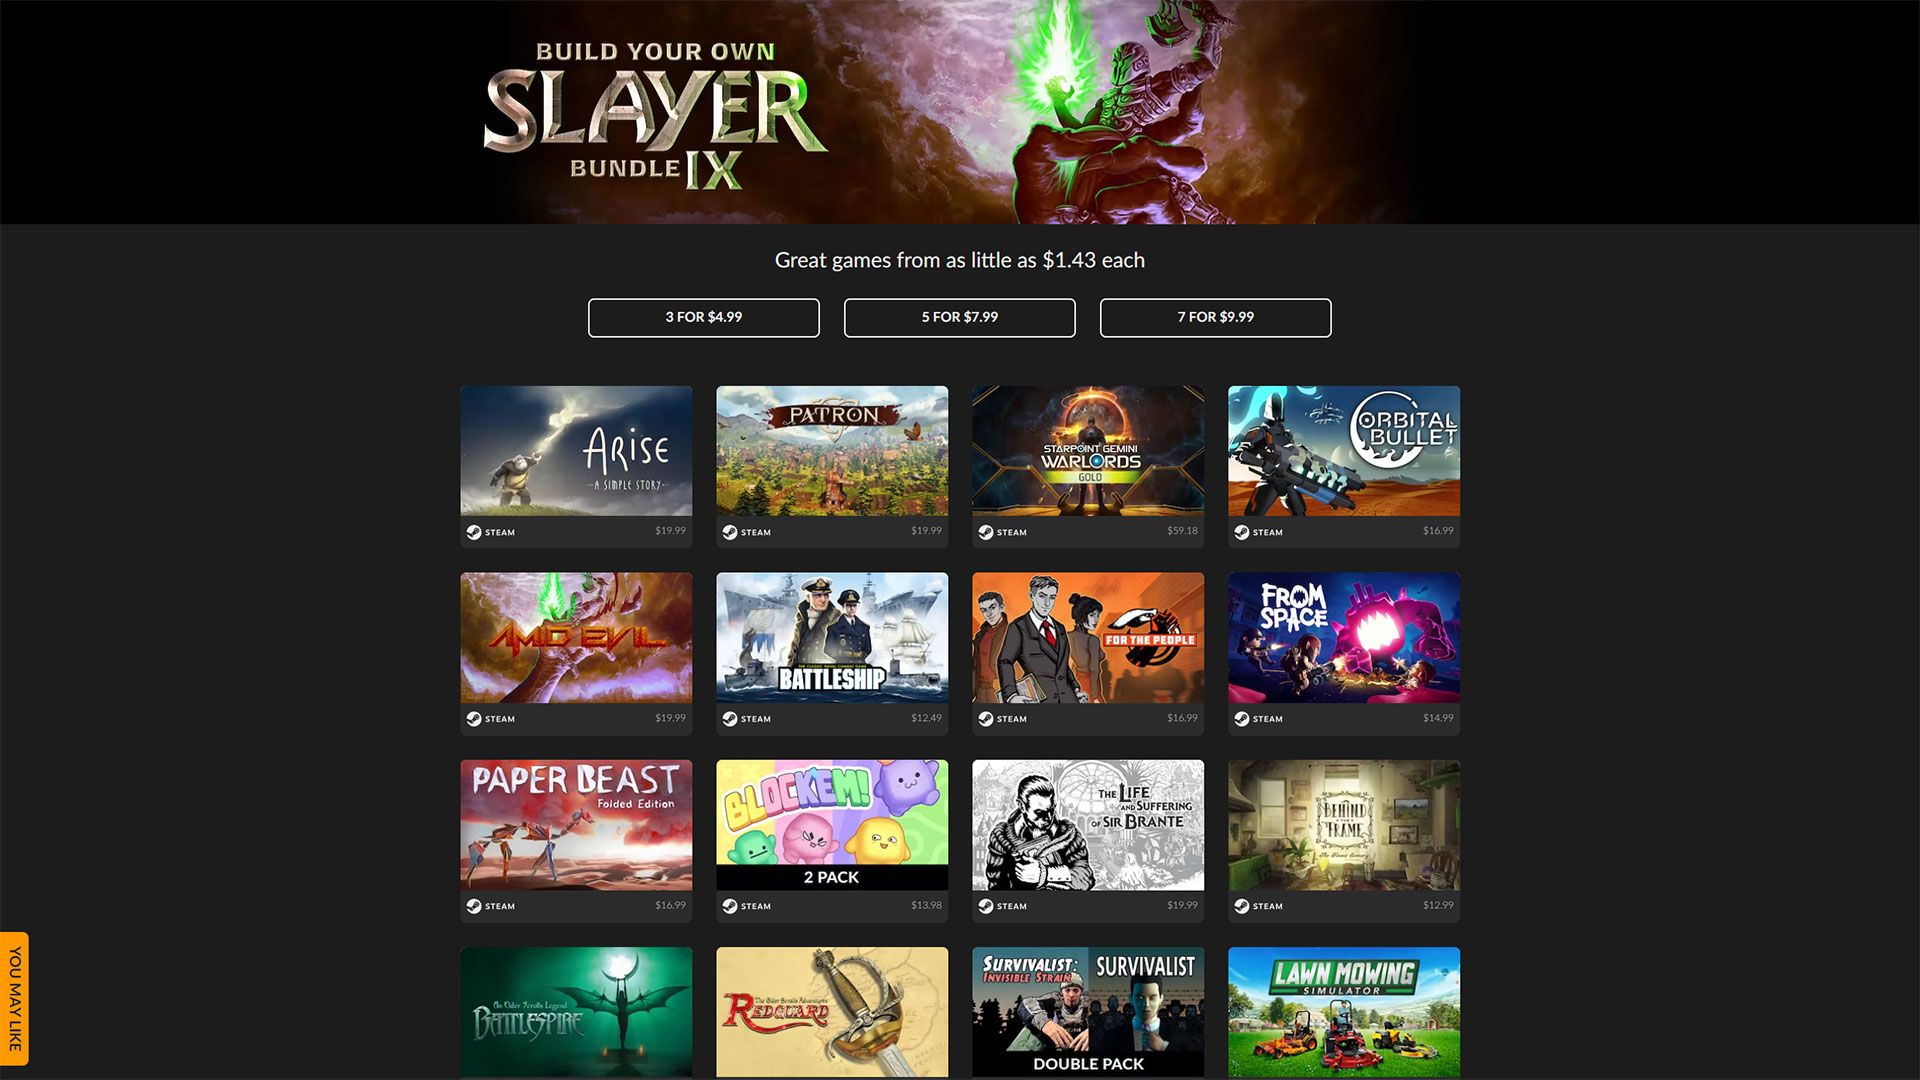 Fanatical's Build Your Own Slayer Bundle IX gets you seven games for $9.99